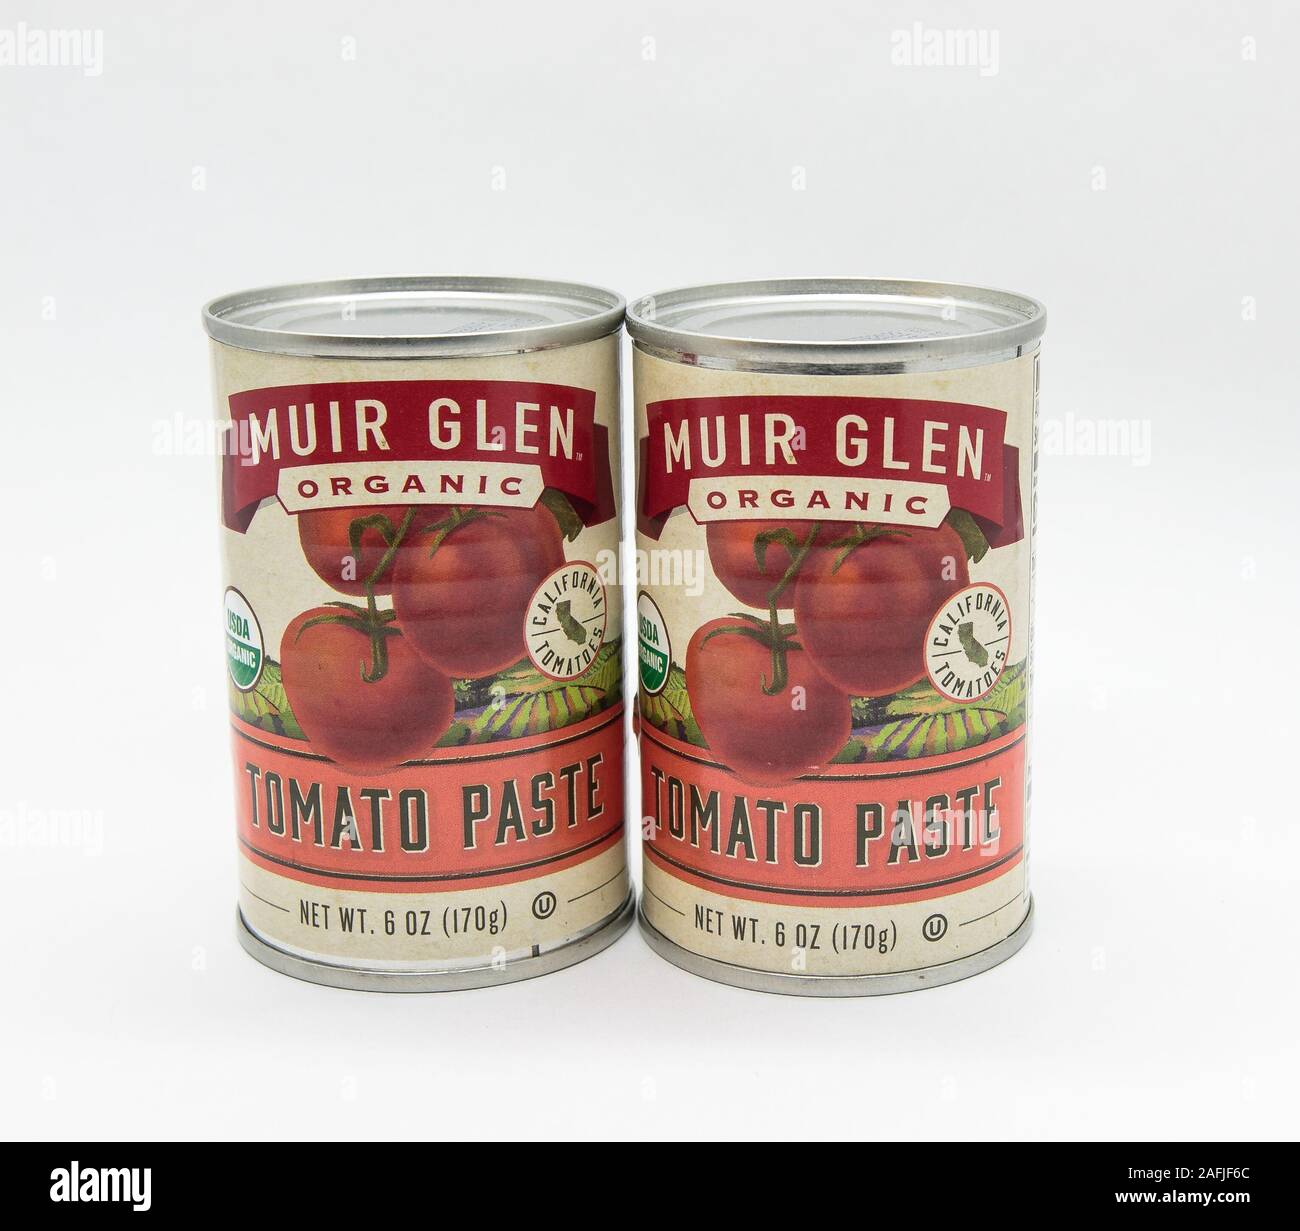 New York, 12/8/2019: Two cans of Muir Glen tomato paste stand against white background. Stock Photo